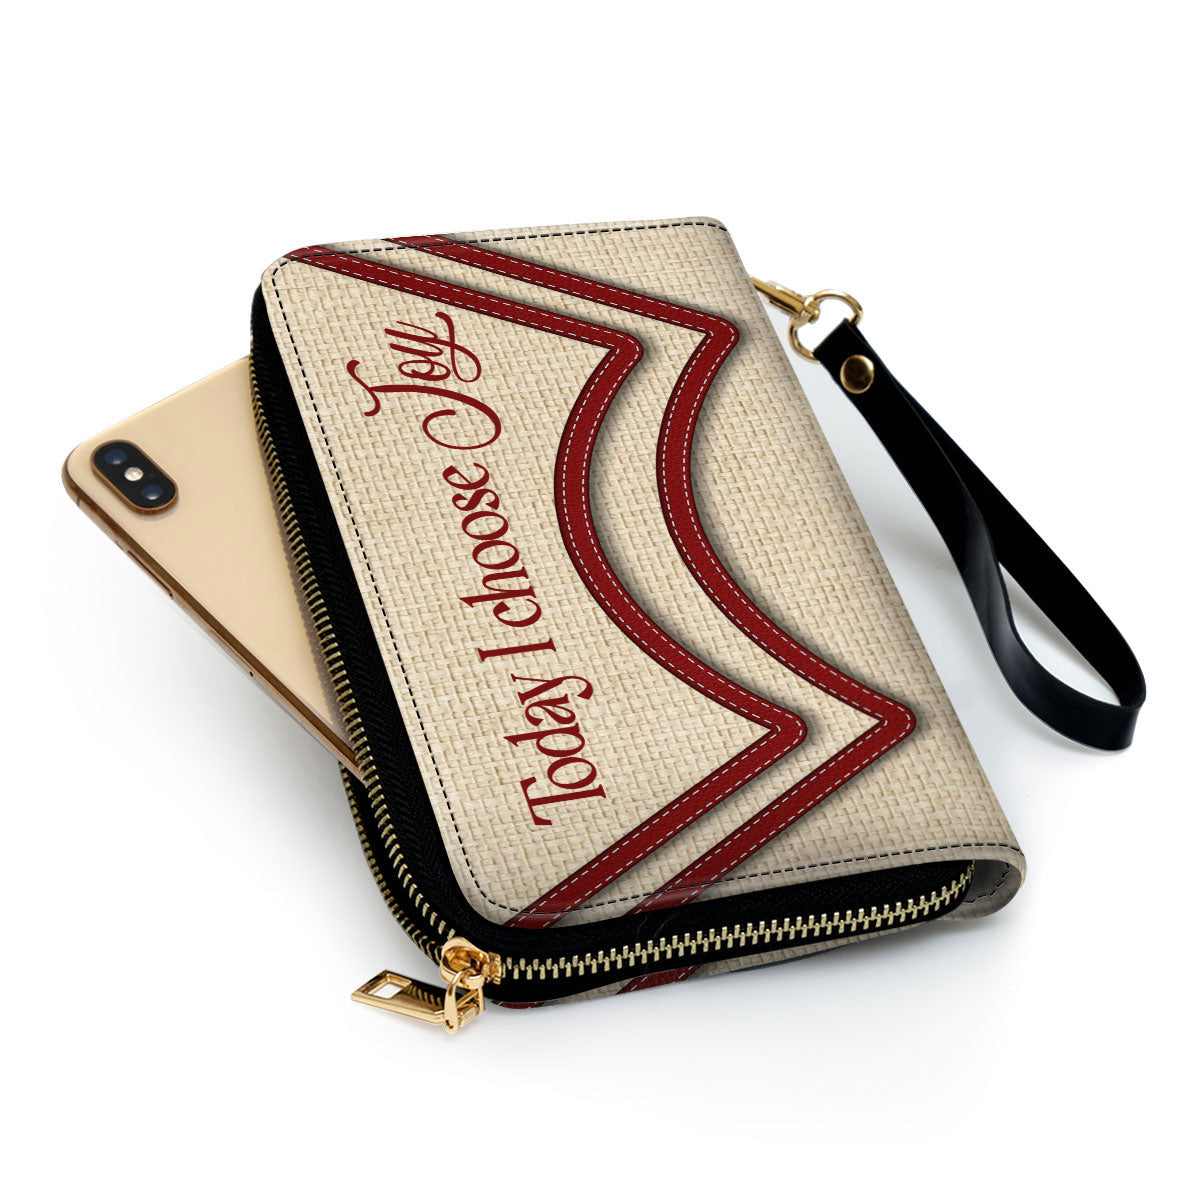 Today I Choose Joy Stunning Clutch Purse For Women - Personalized Name - Christian Gifts For Women